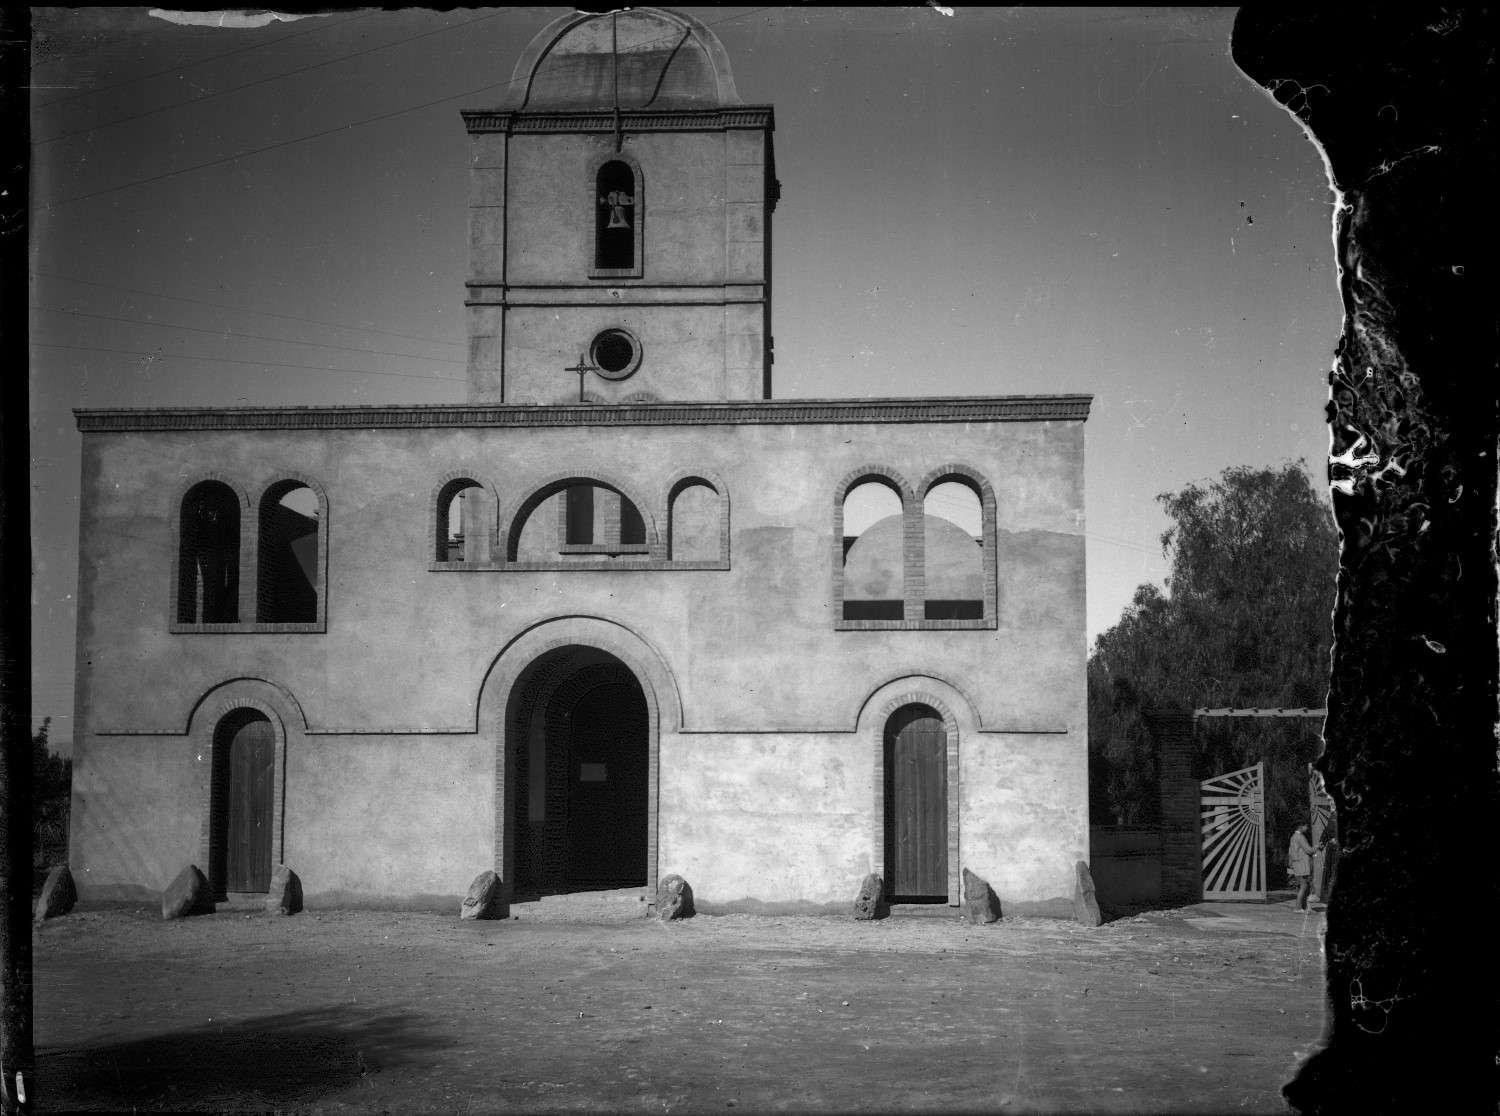 Church with gate, open facade with windows 